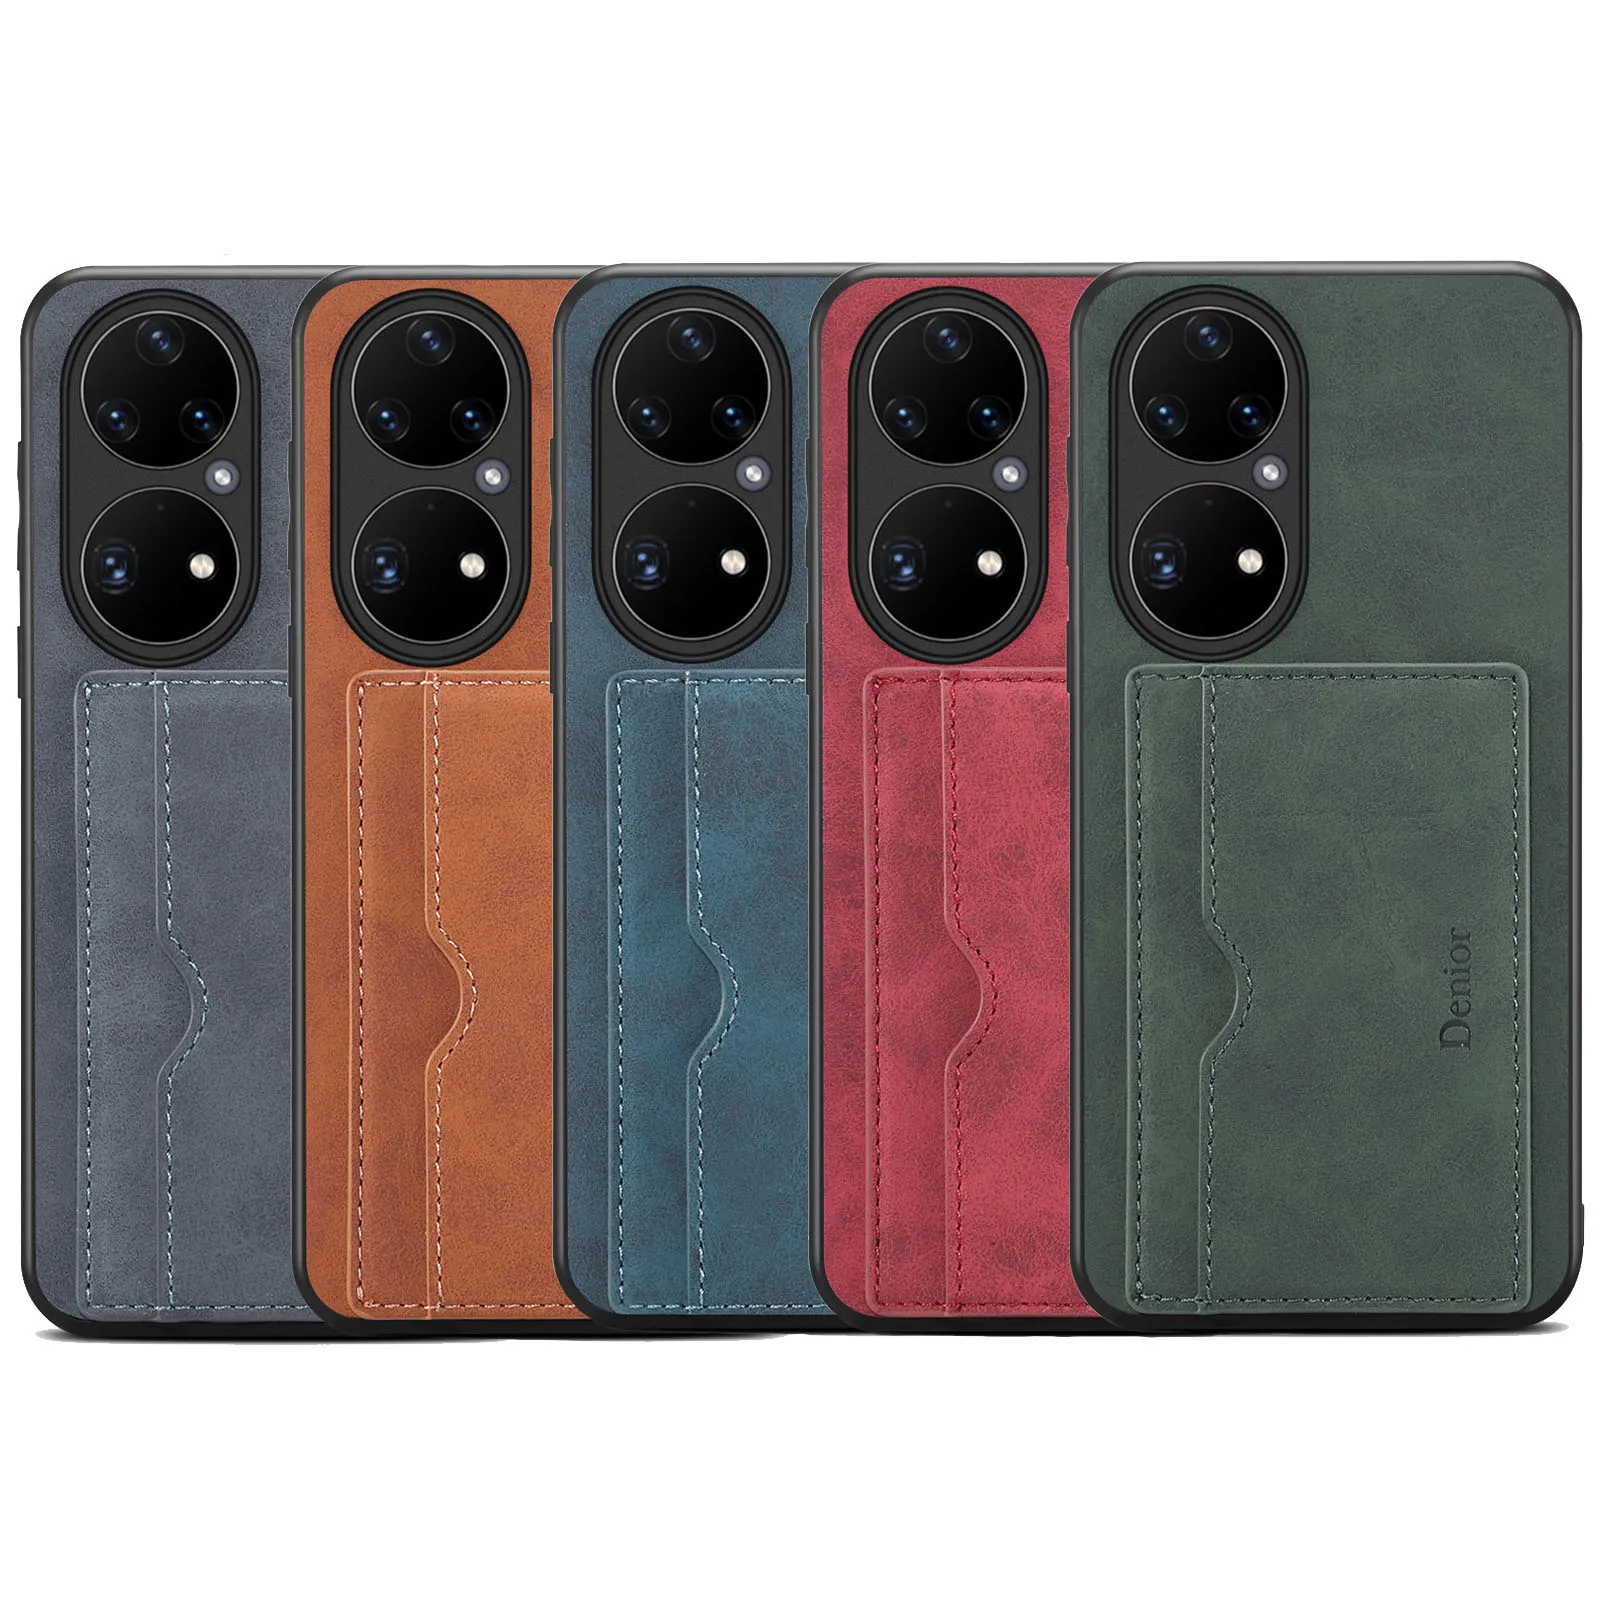 PU Leather Flip Shockproof Wallet Case For Huawei P50 Pro P40 Multi Card Slot Stand Back Cover For Huawei Mate 40 Pro Plus Coque